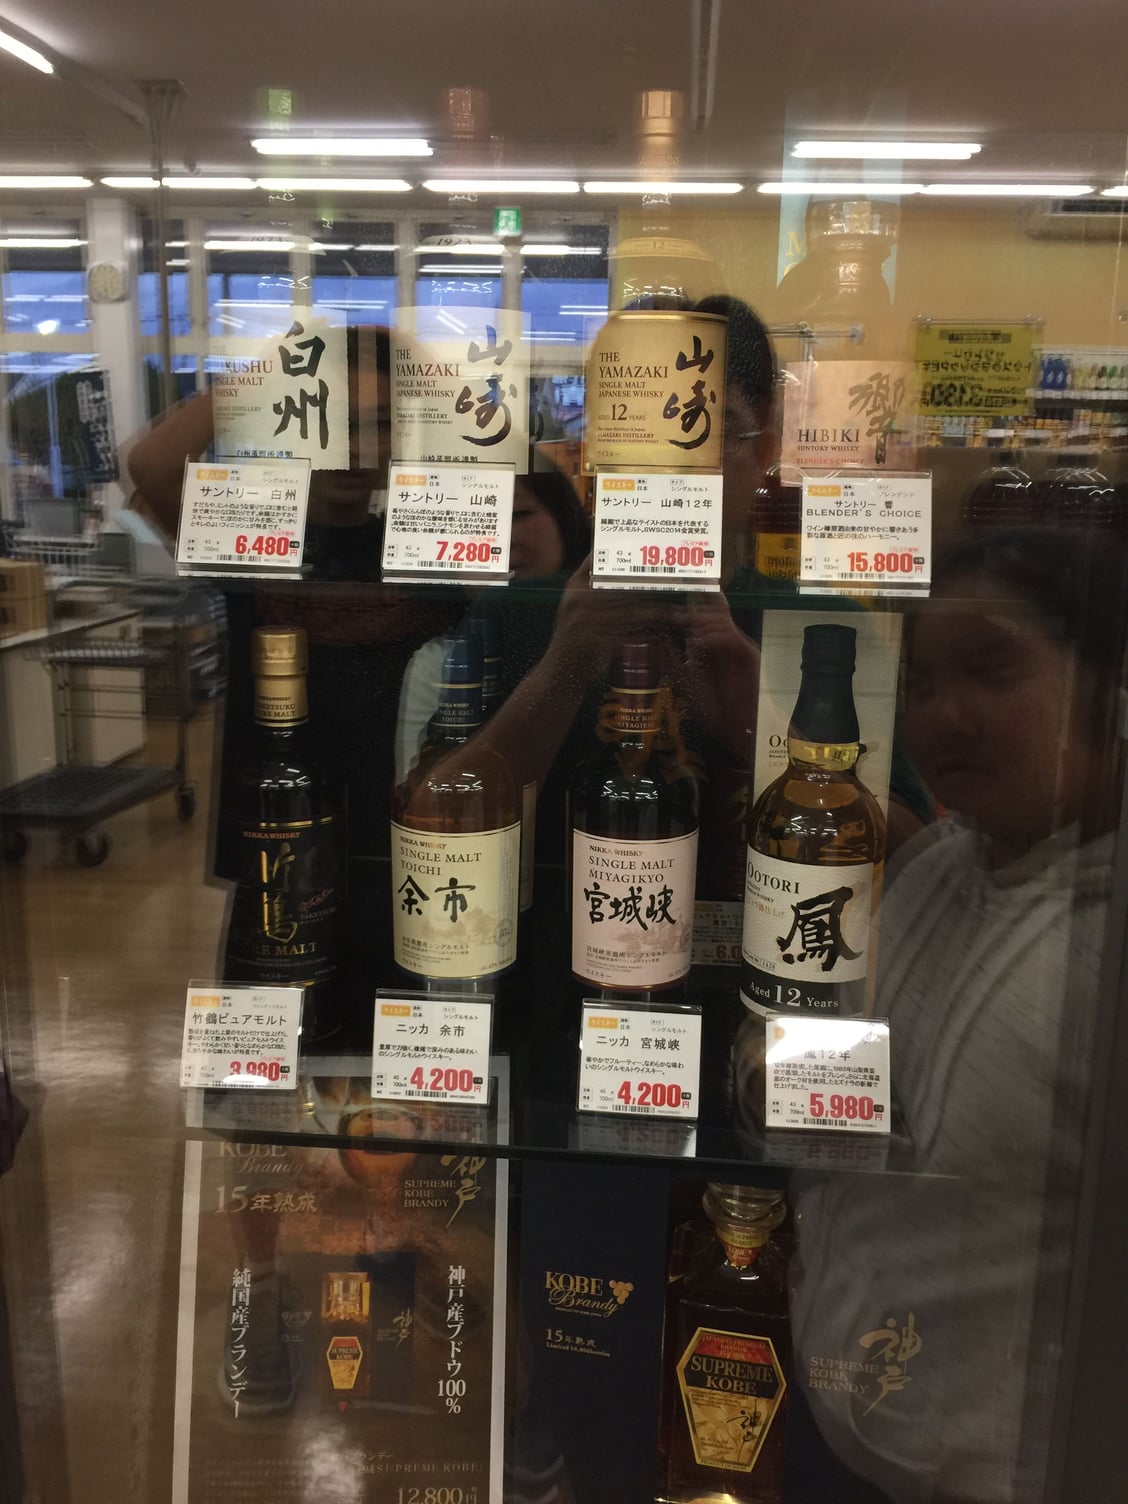 DFS Group Whiskey Festival at Hong Kong airport - Inside Retail Asia